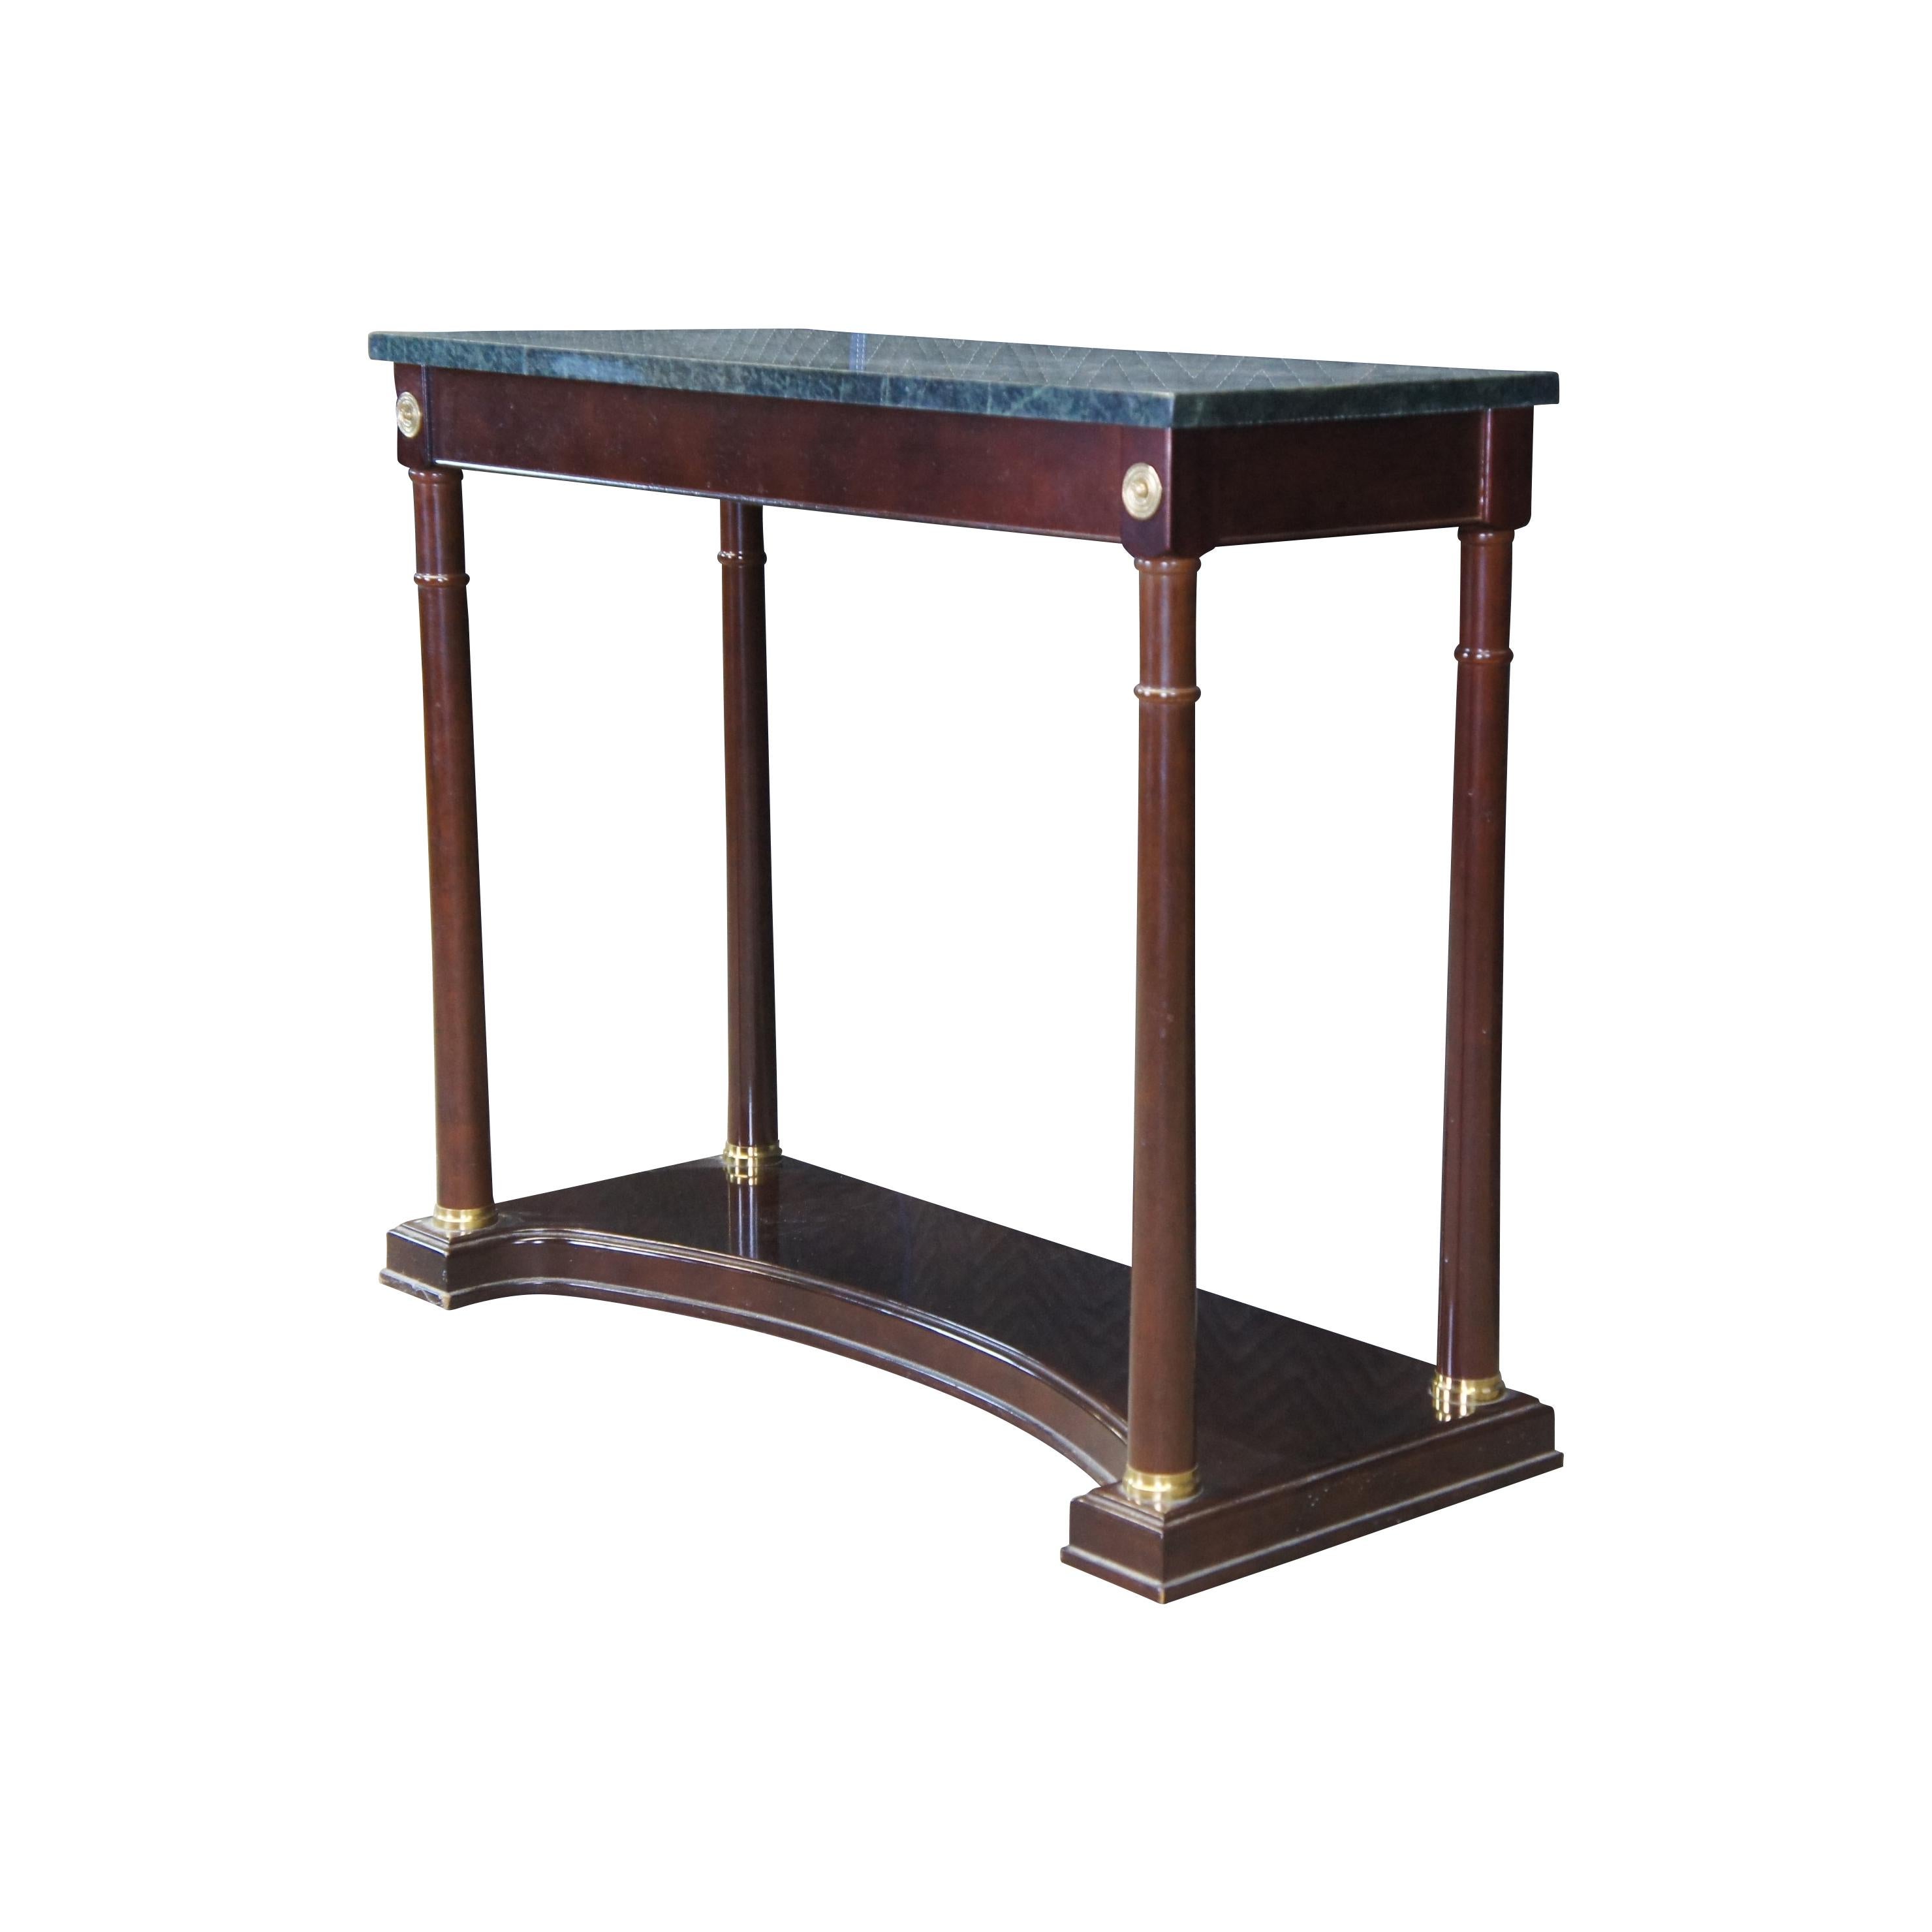 A stunning neoclassical inspired console table by Bombay Company. Made from Mahogany with a green marble top and brass accents. Circa 1989.